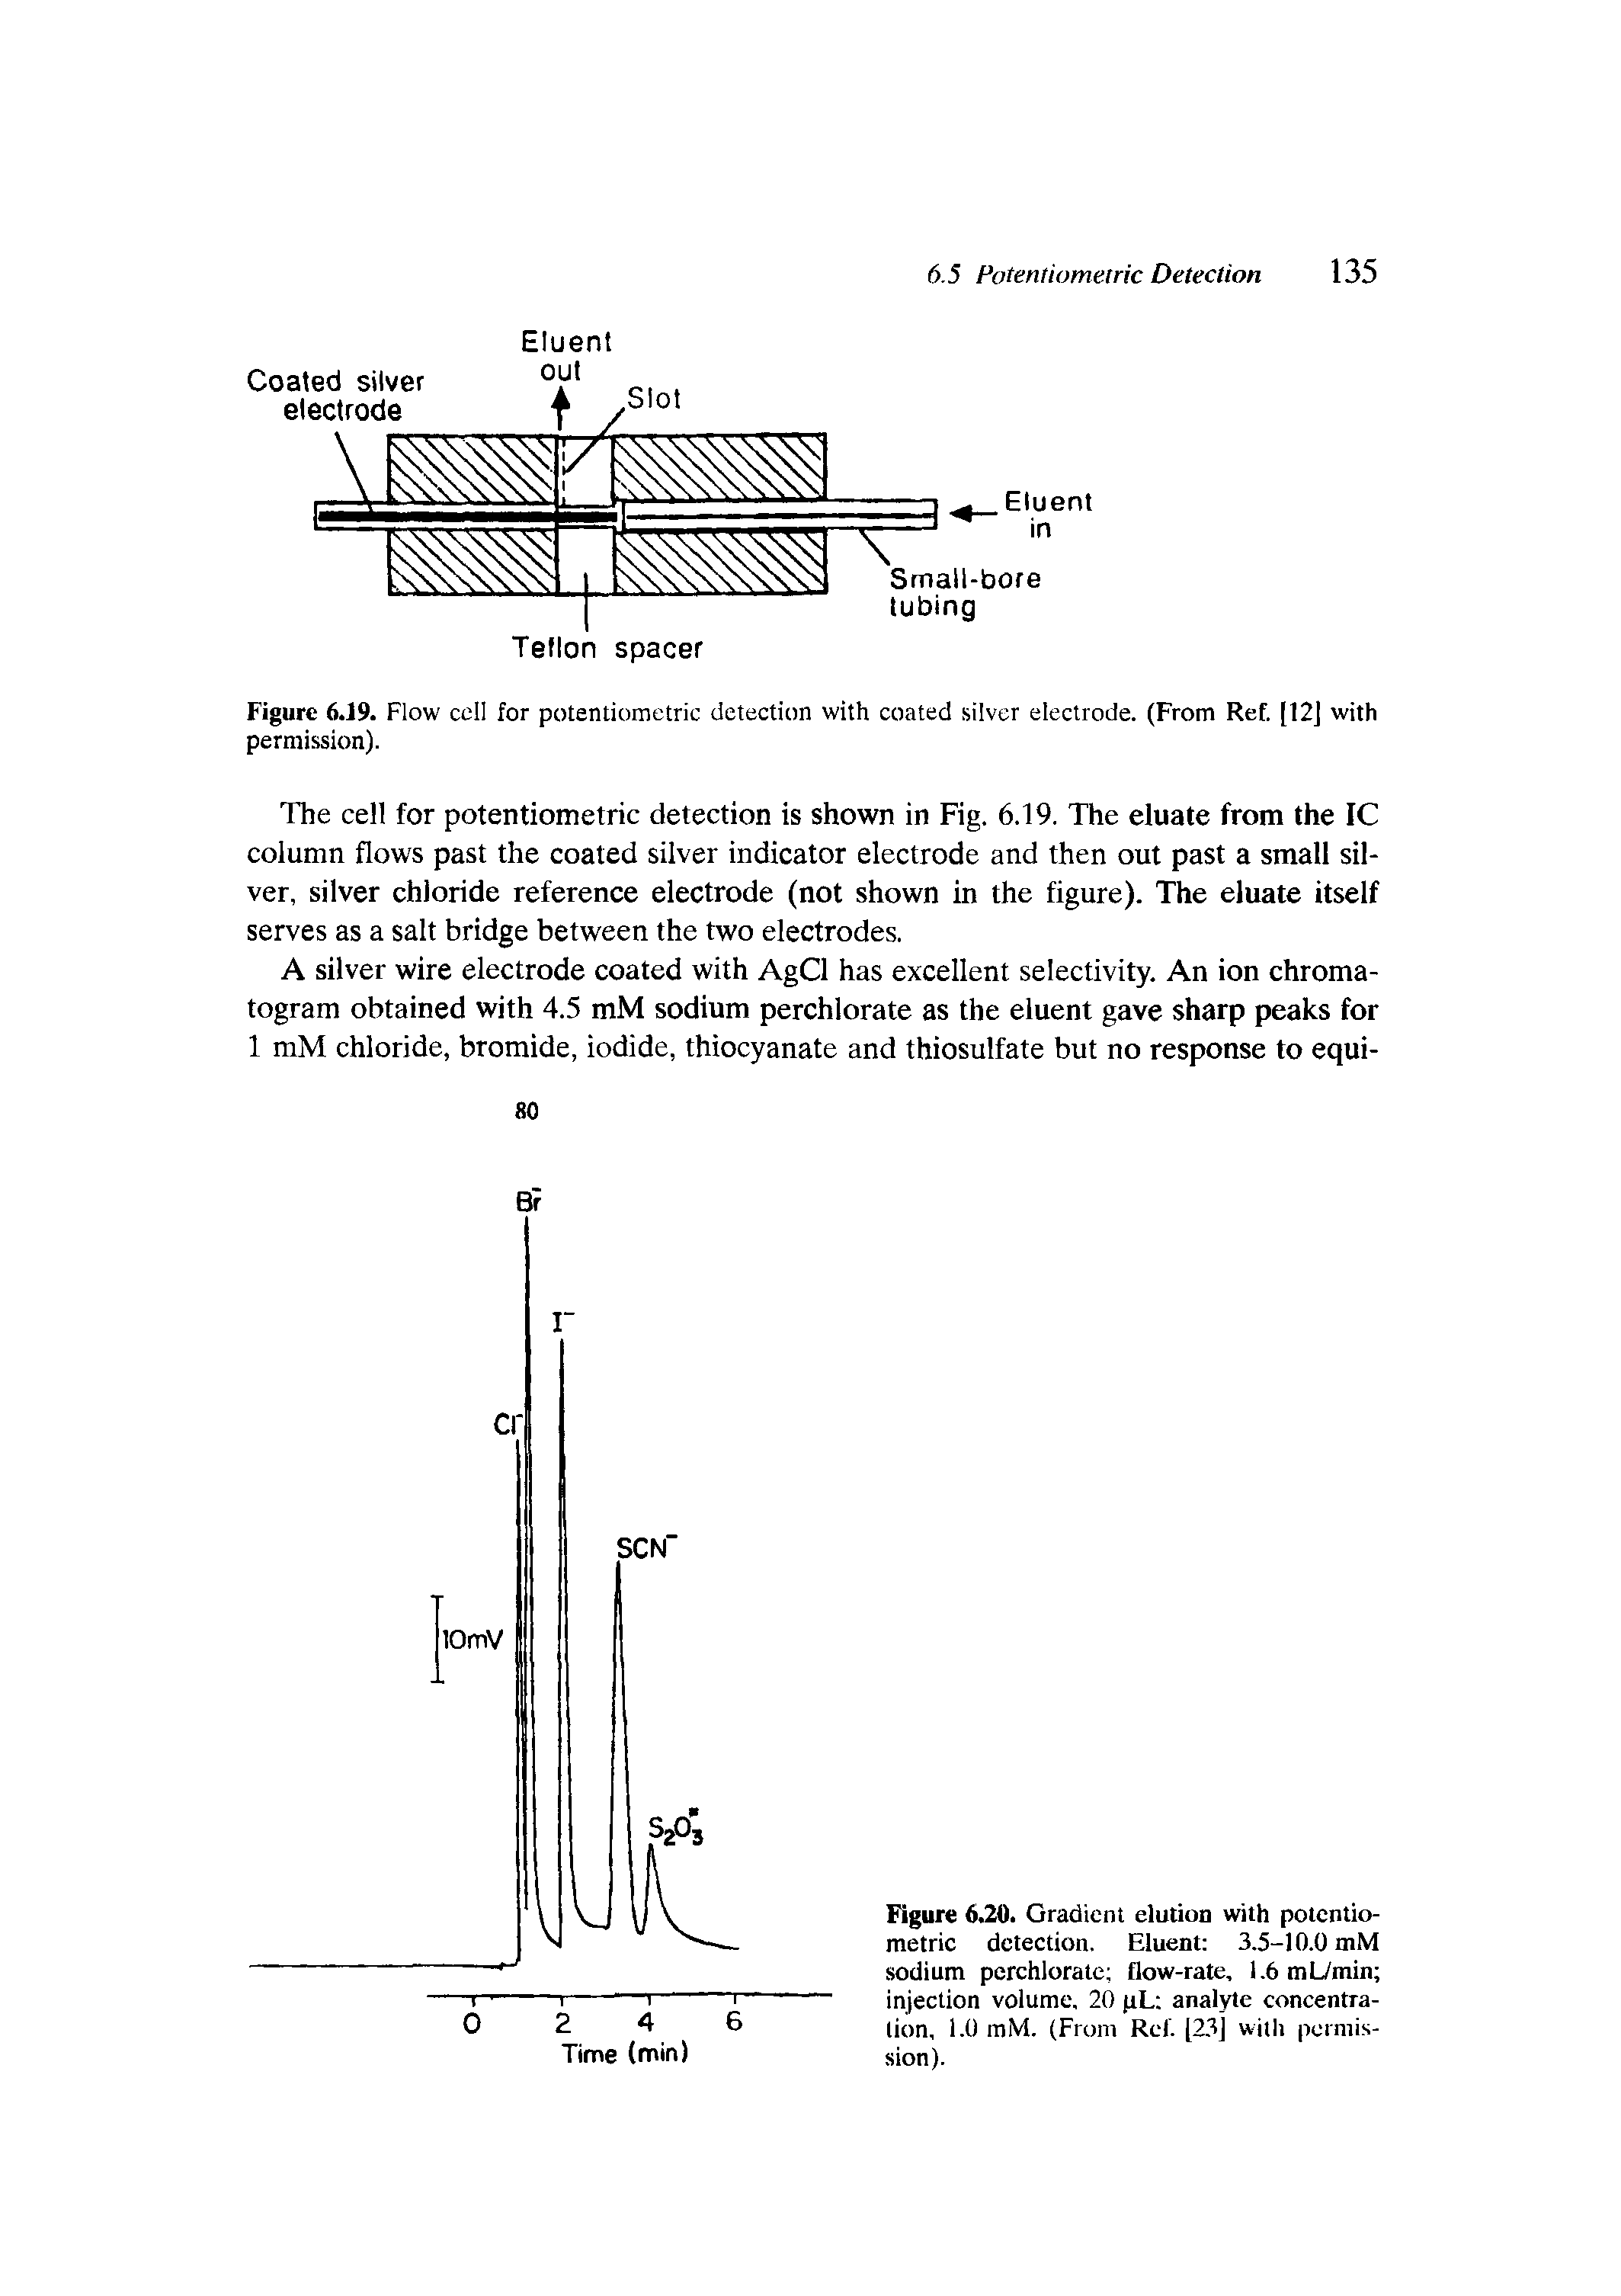 Figure 6.20. Gradient elution with potentiometric detection. Eluent 3.5-10.0 mM sodium perchlorate flow-rate, l.6mL/min injection volume, 20 pL analyte concentration, 1.0 mM. (From Ref. [2.3J witli permission).